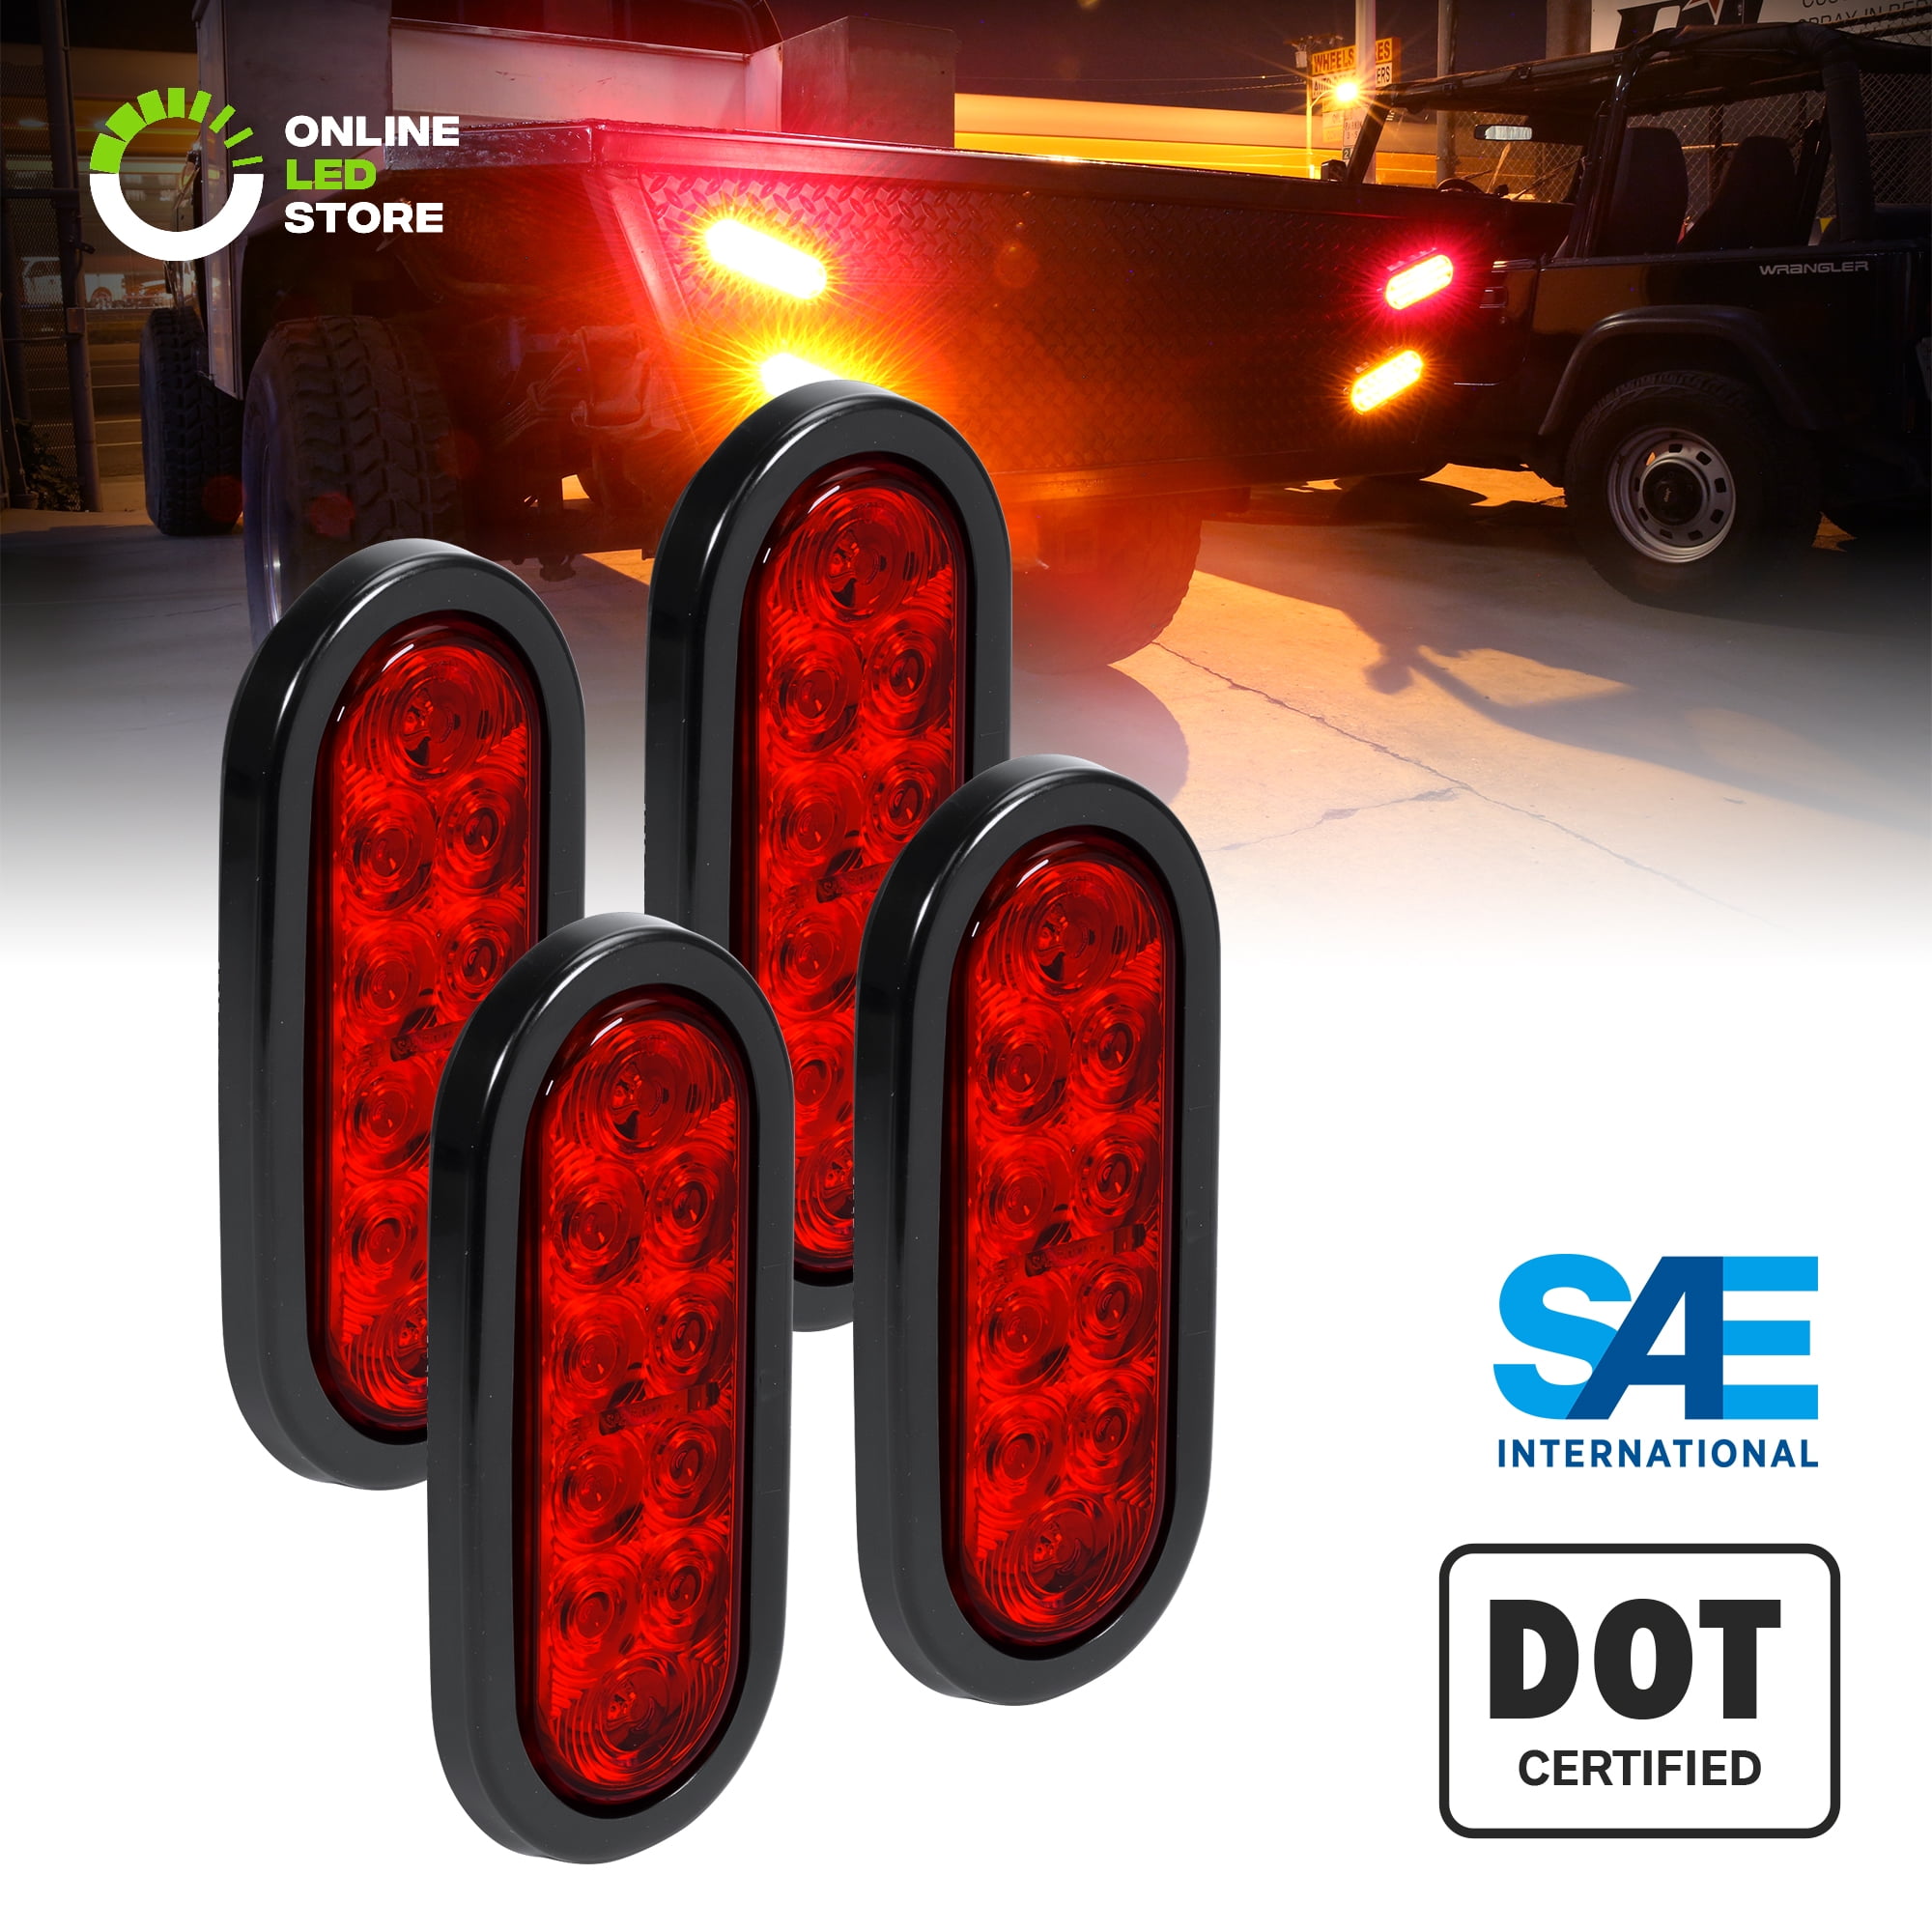 Grommet Plug Included Stop Turn Signal Lights for Truck Trailer RV Boat Bus Waterproof 4inch Round Red LED Trailer Tail Lights Pack of 8